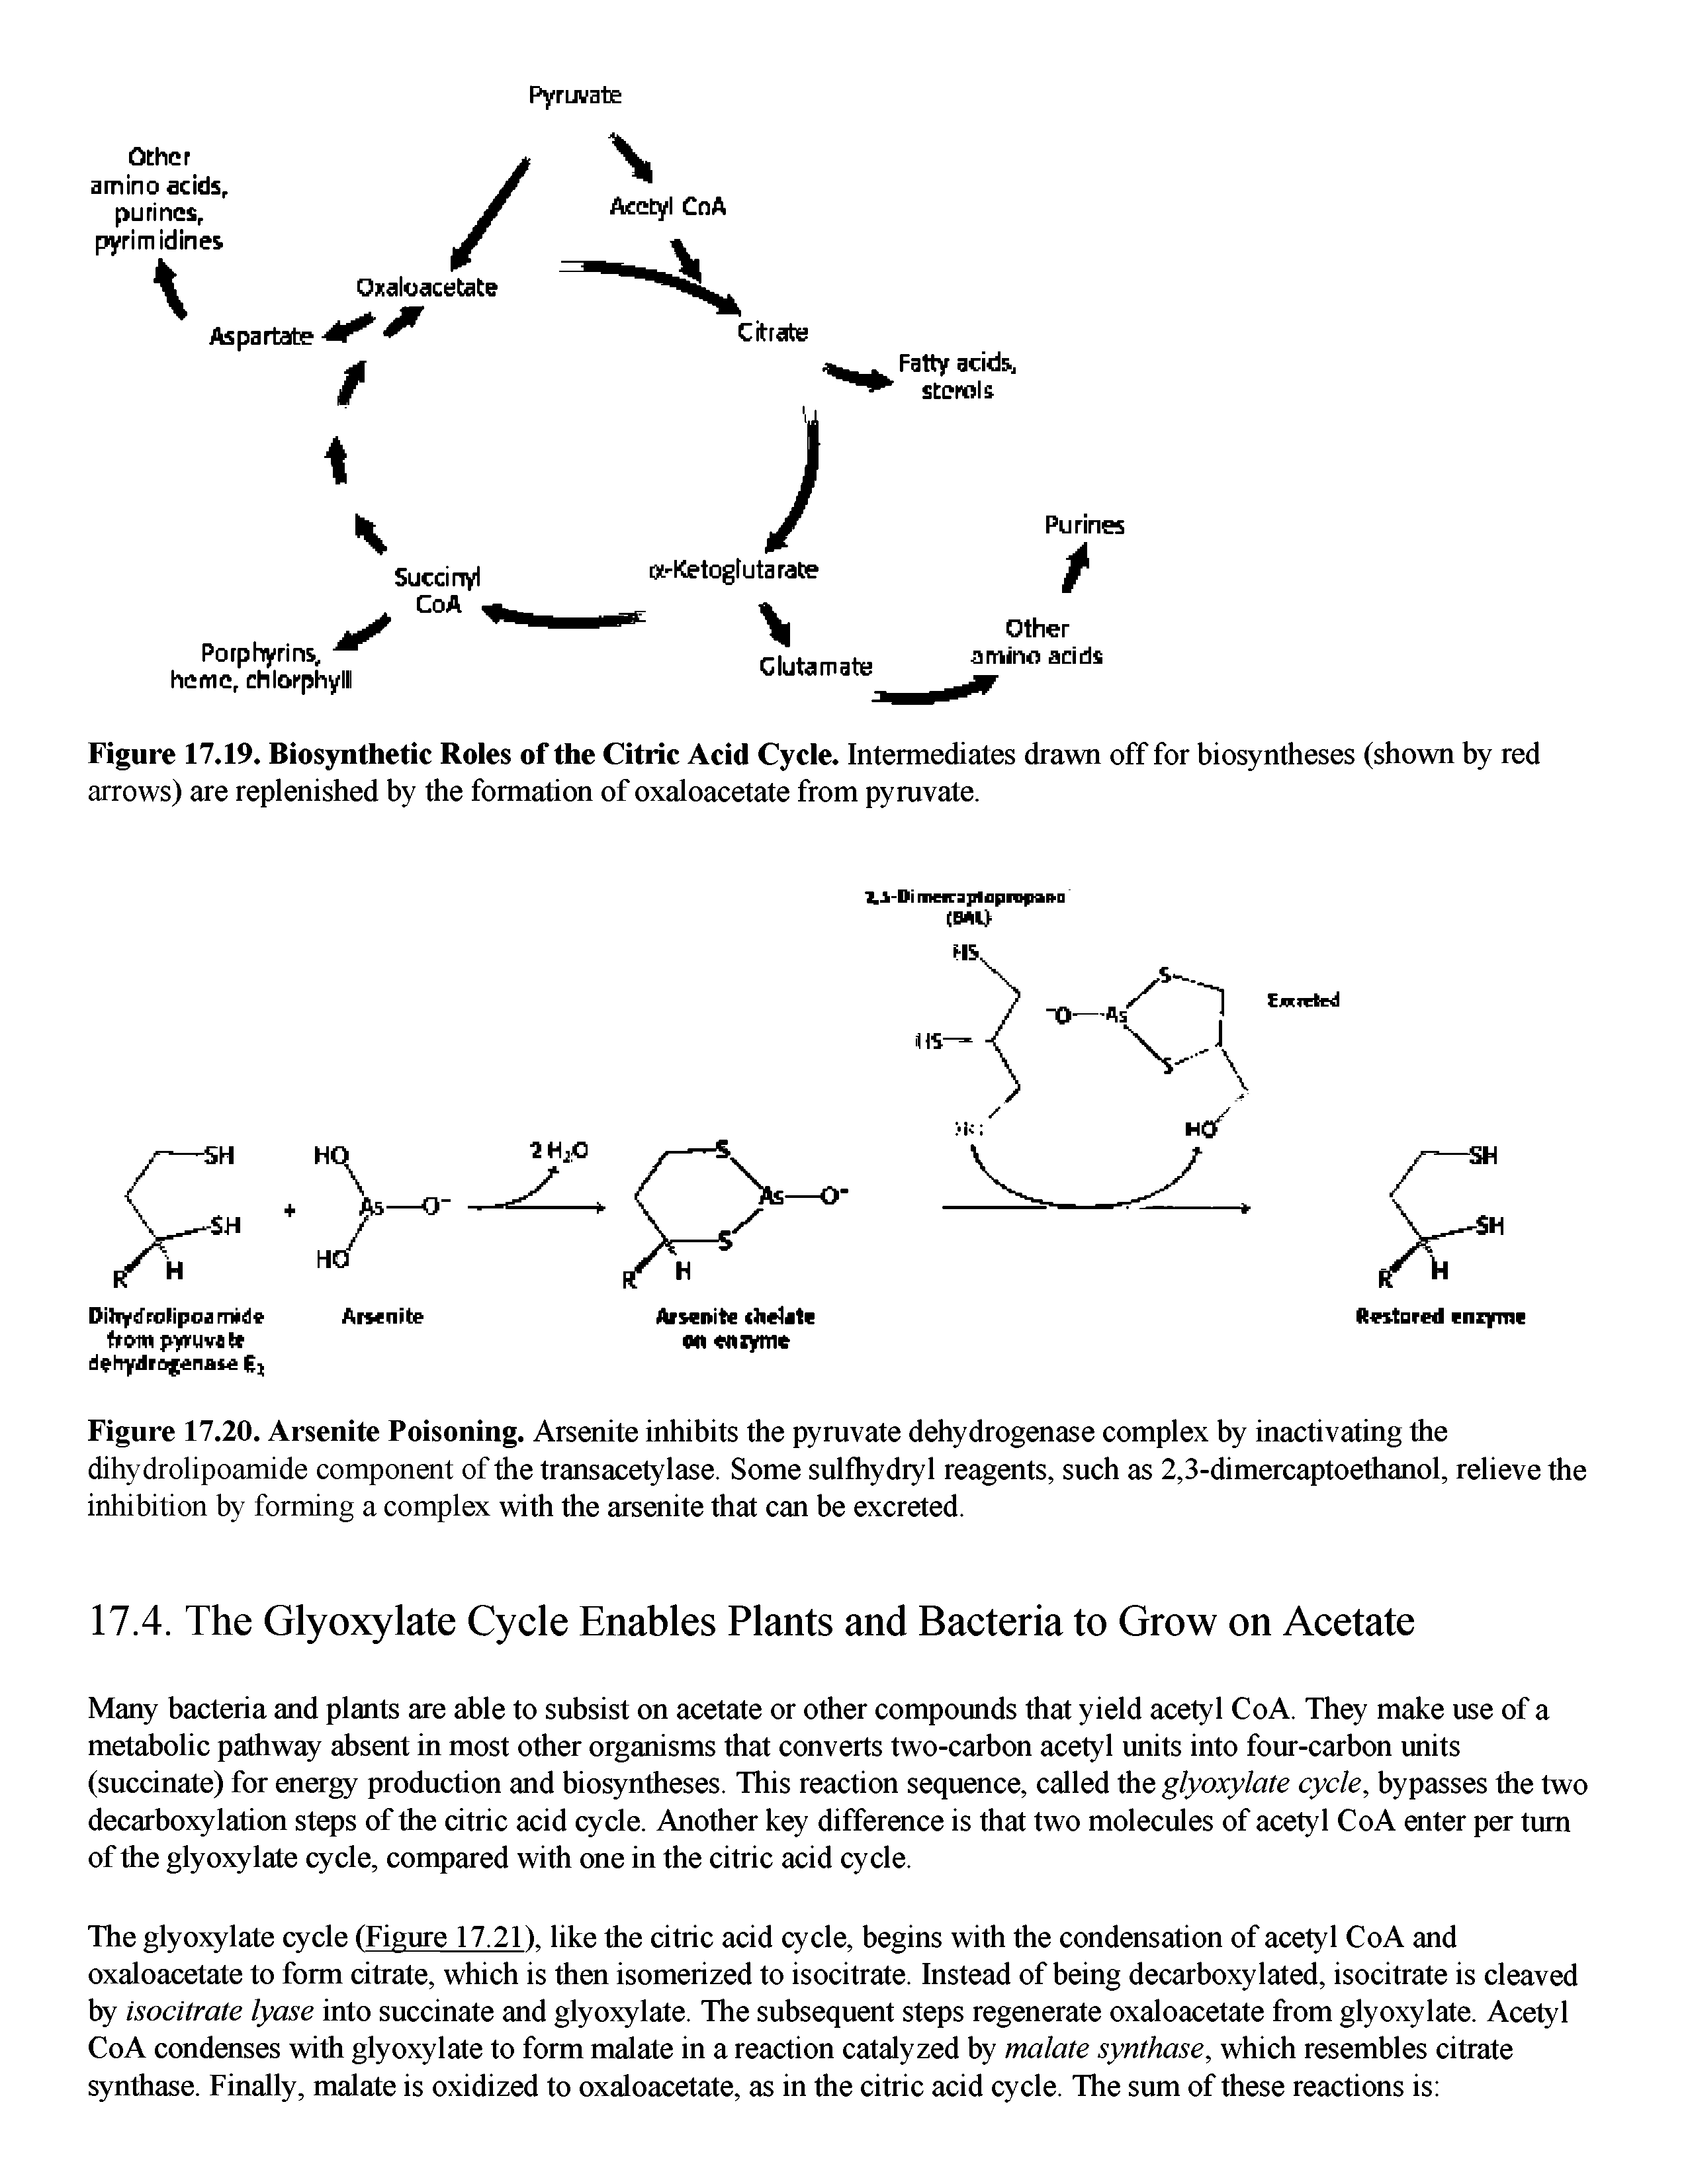 Figure 17.20. Arsenite Poisoning. Arsenite inhibits the pyruvate dehydrogenase complex by inactivating the dihydrolipoamide component of the transacetylase. Some sulfhydryl reagents, such as 2,3-dimercaptoethanol, relieve the inhibition by forming a complex with the arsenite that can be excreted.